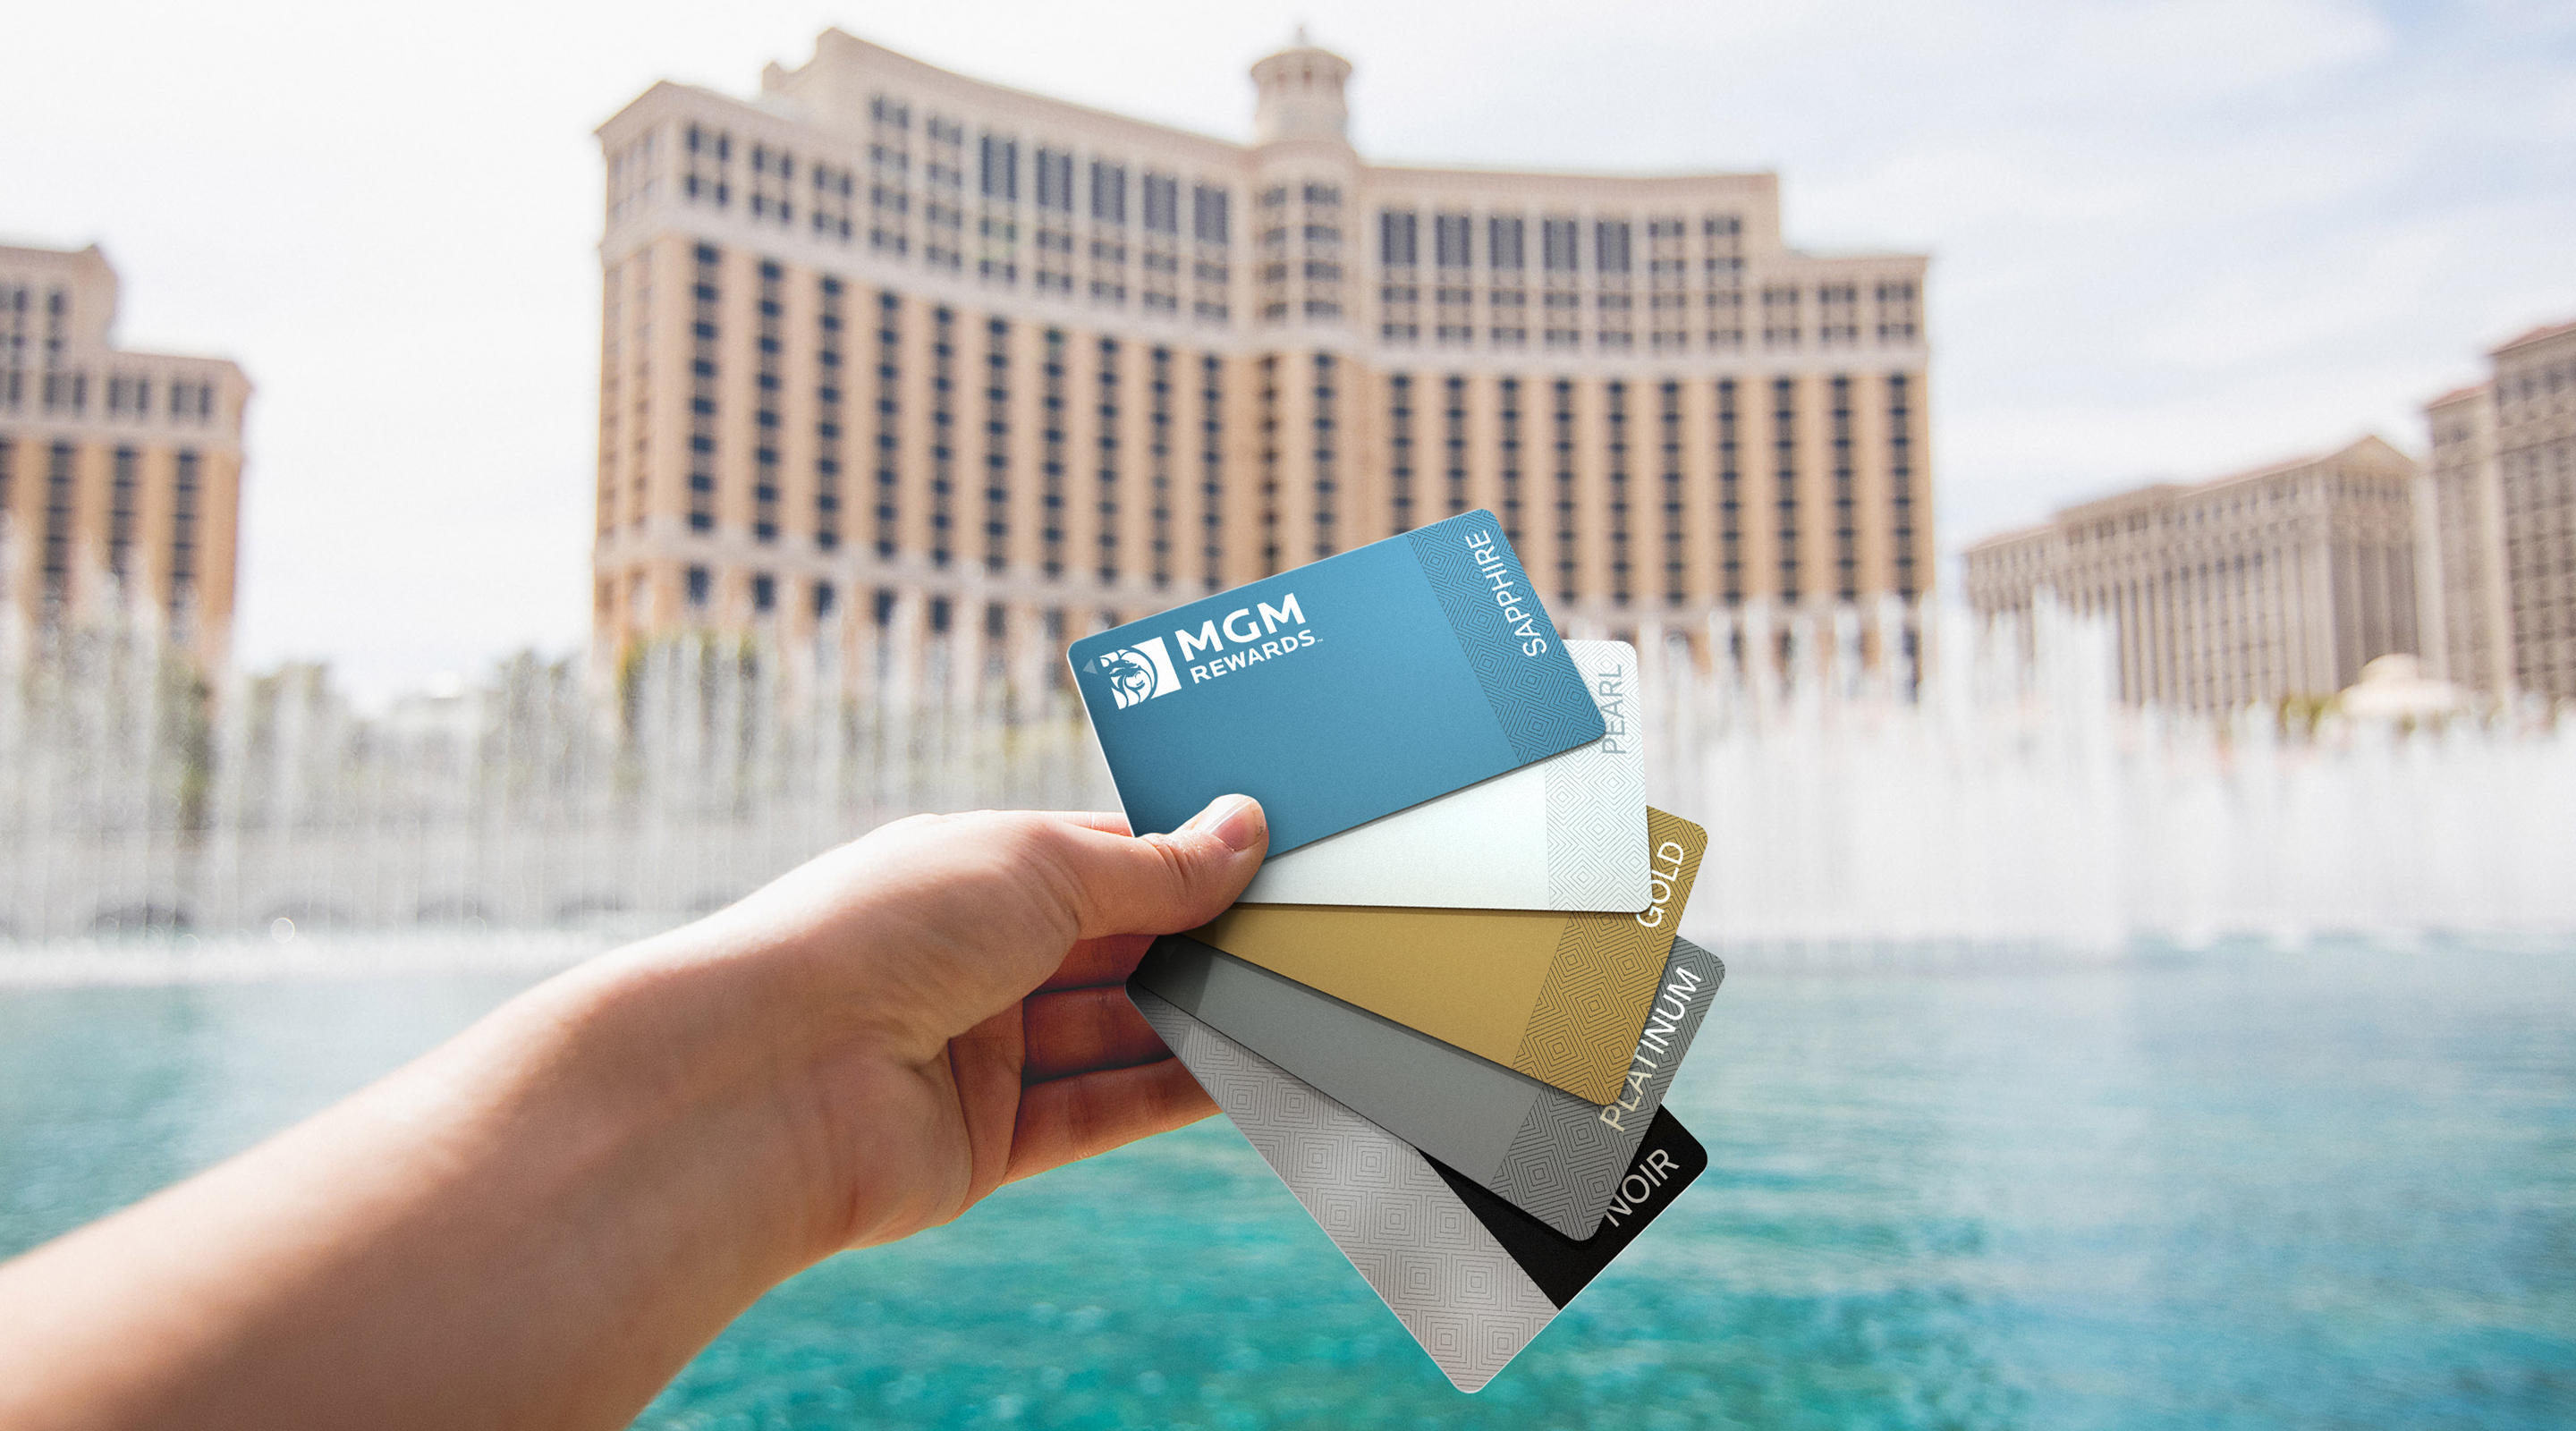 MGM Rewards Cards with Fountains of Bellagio in the background